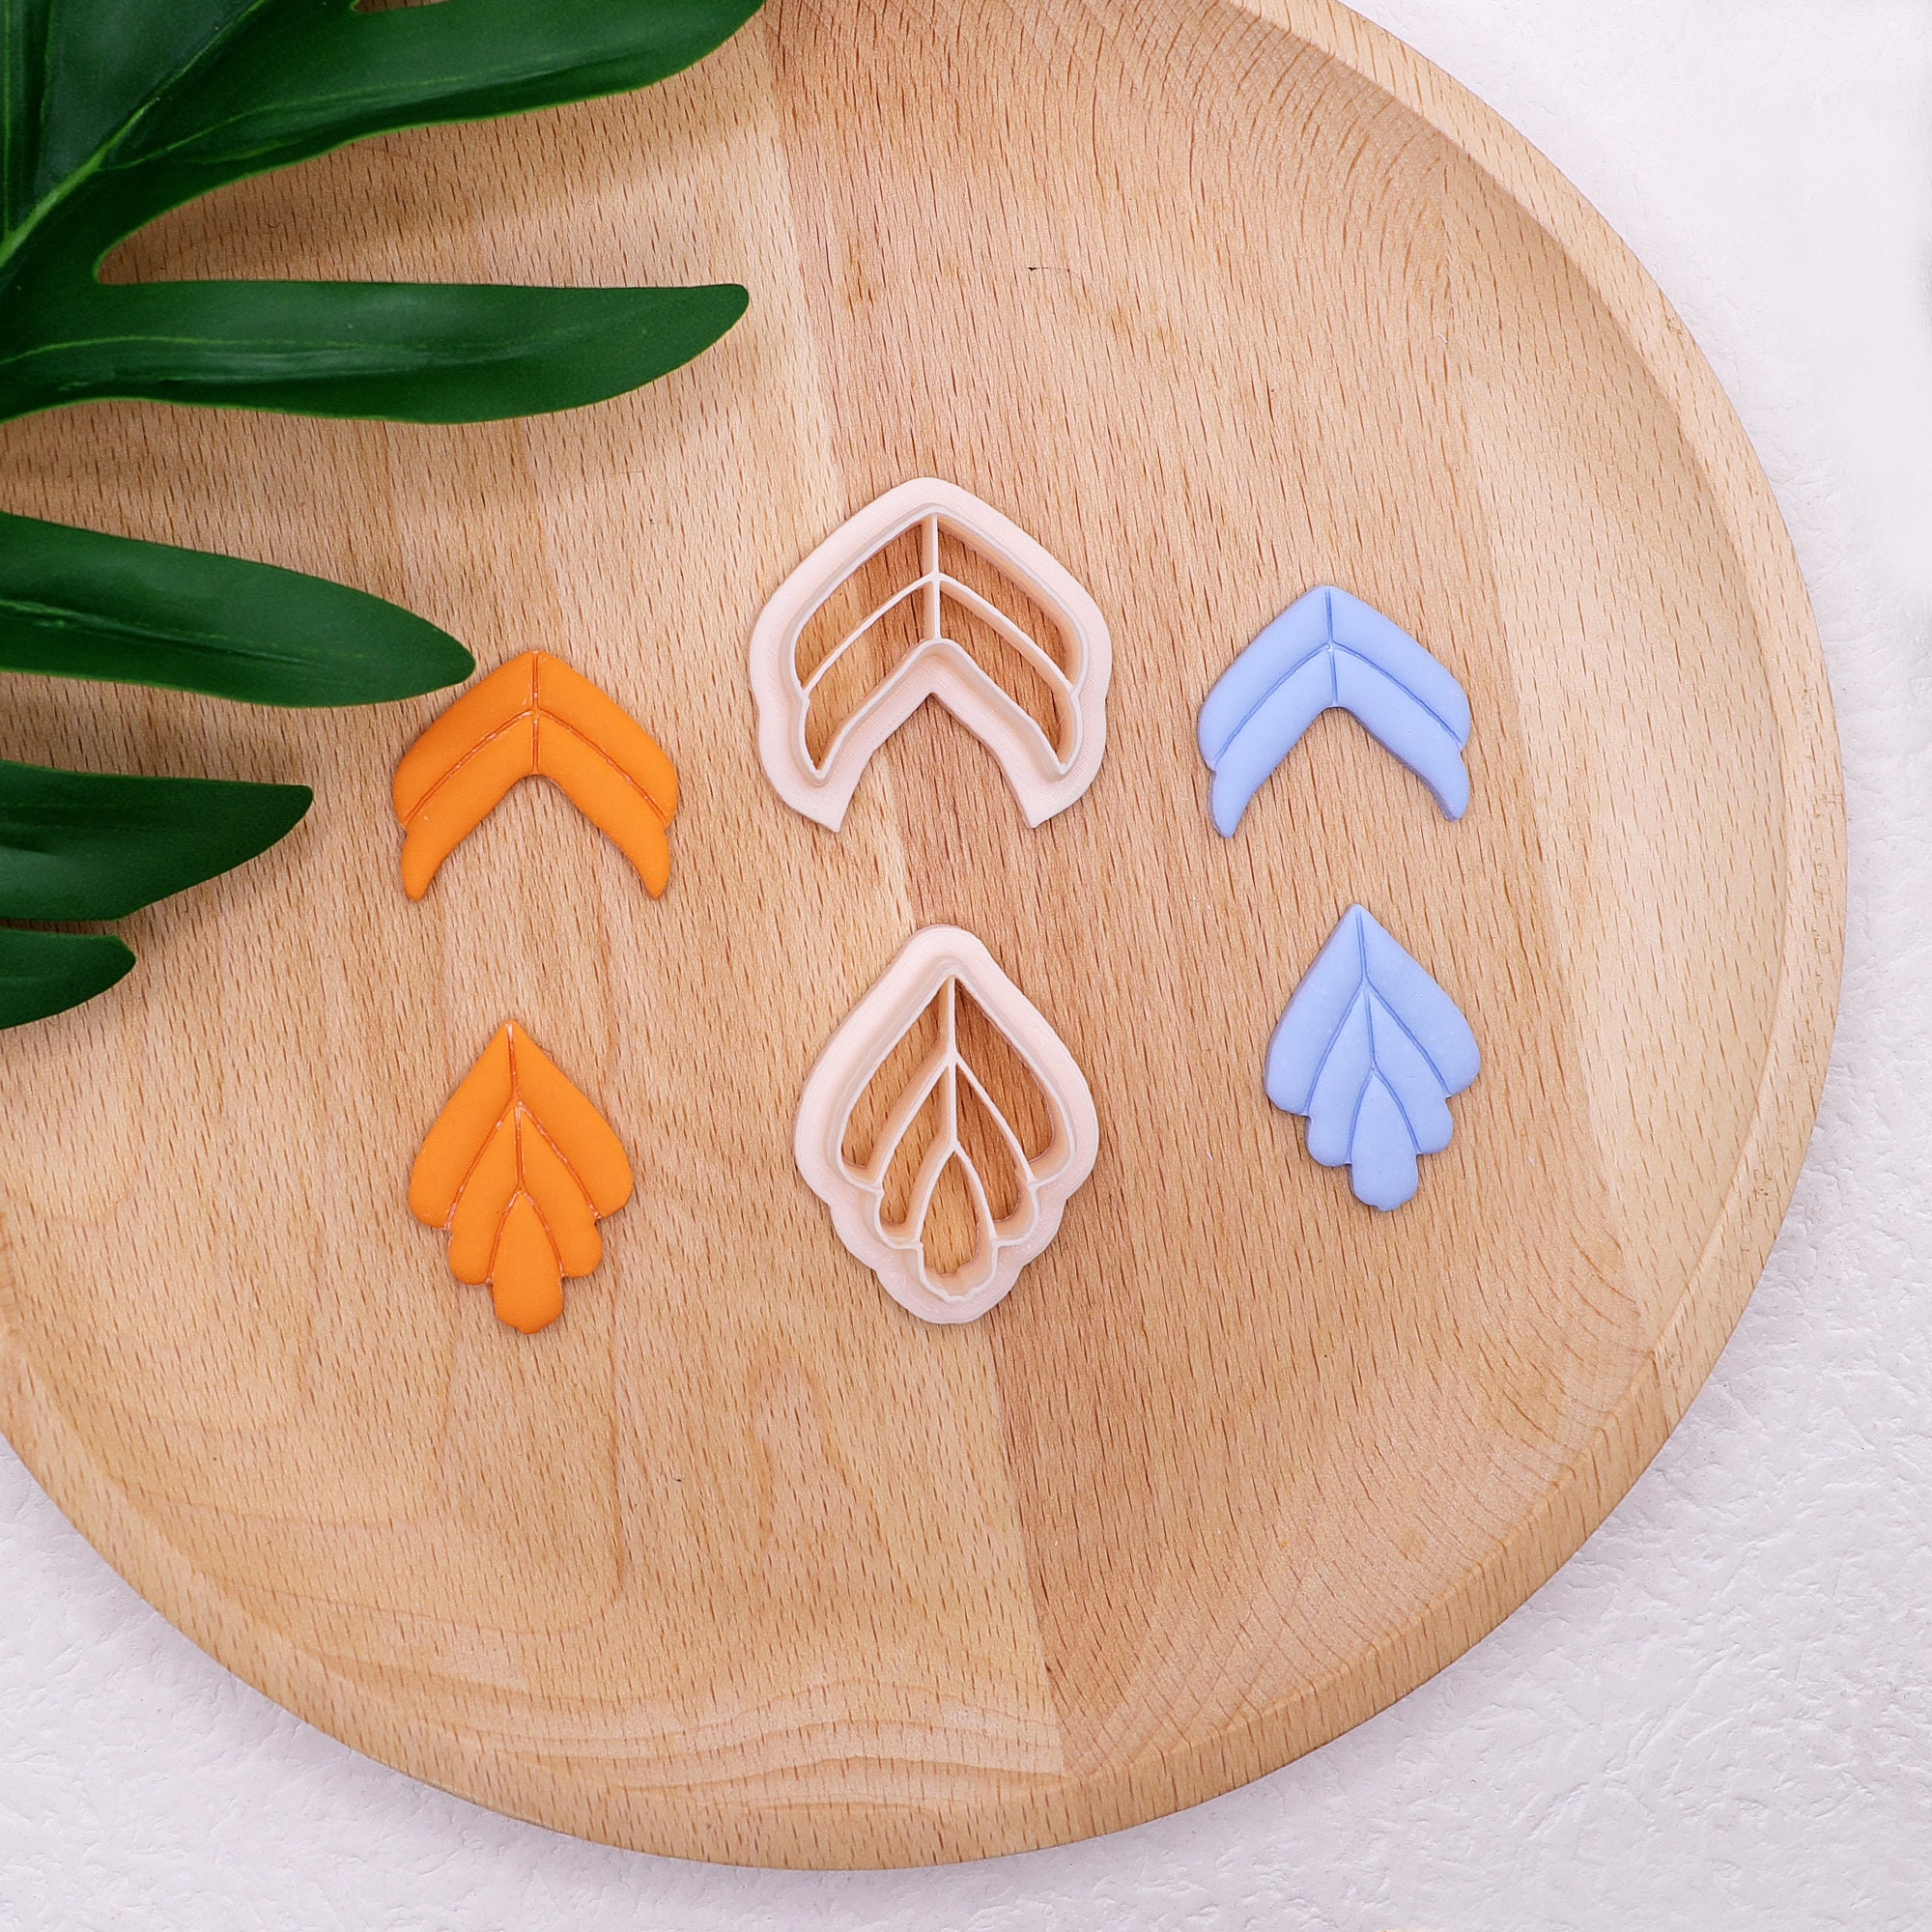 Keoker Fall Polymer Clay Cutters Maple Leaf Clay Cutters for Earrings  Making, 9 Shapes Autumn Clay Earrings Cuttersstuds Clay Cutters 